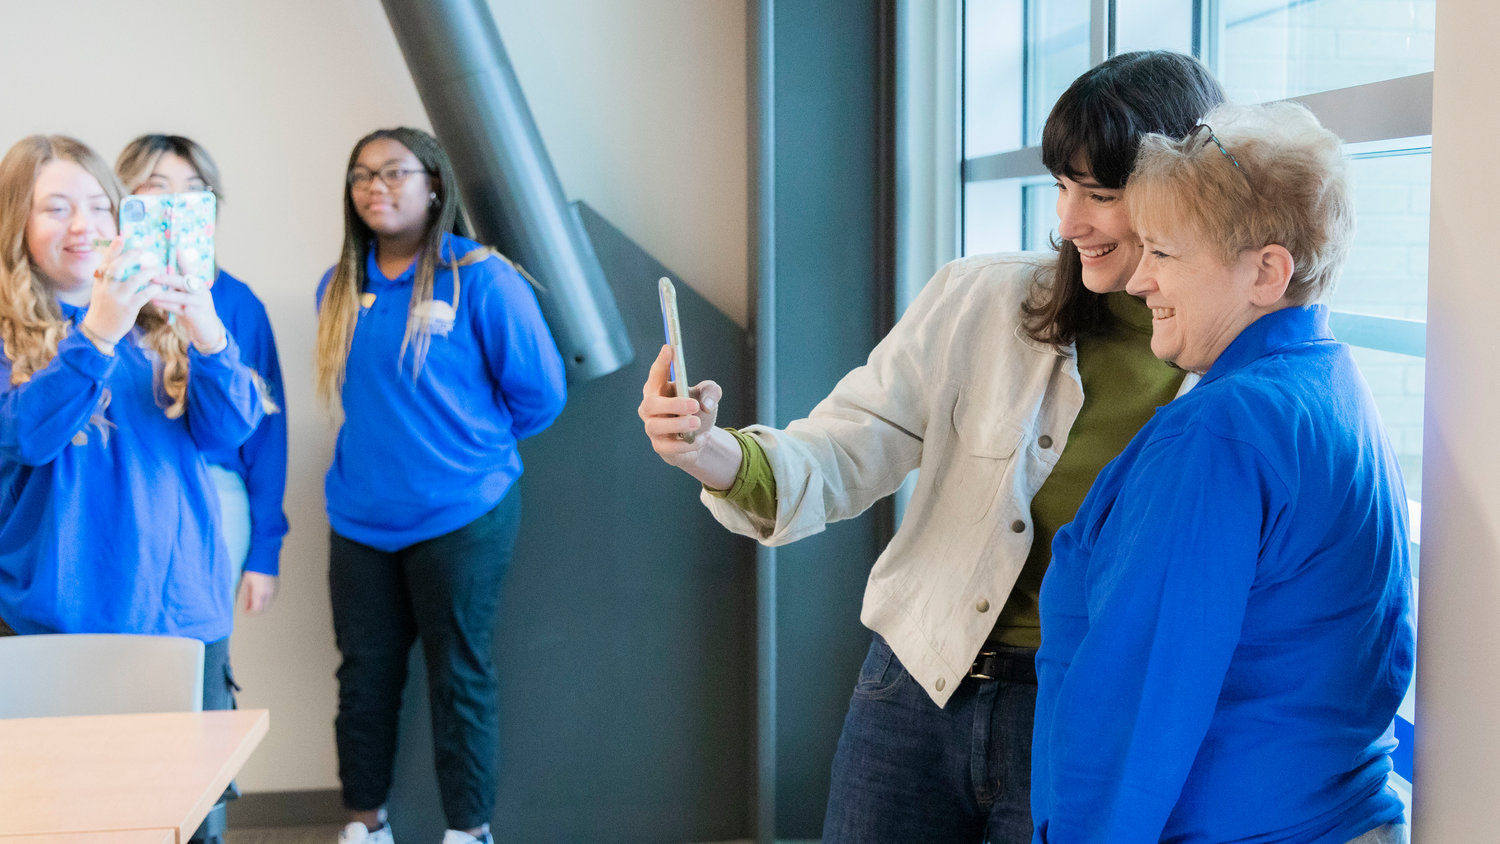 Marie Gluesenkamp Perez smiles for a selfie with Shelly Bannish, director of student life and involvement at Centralia College, before a tour of the campus on Friday.